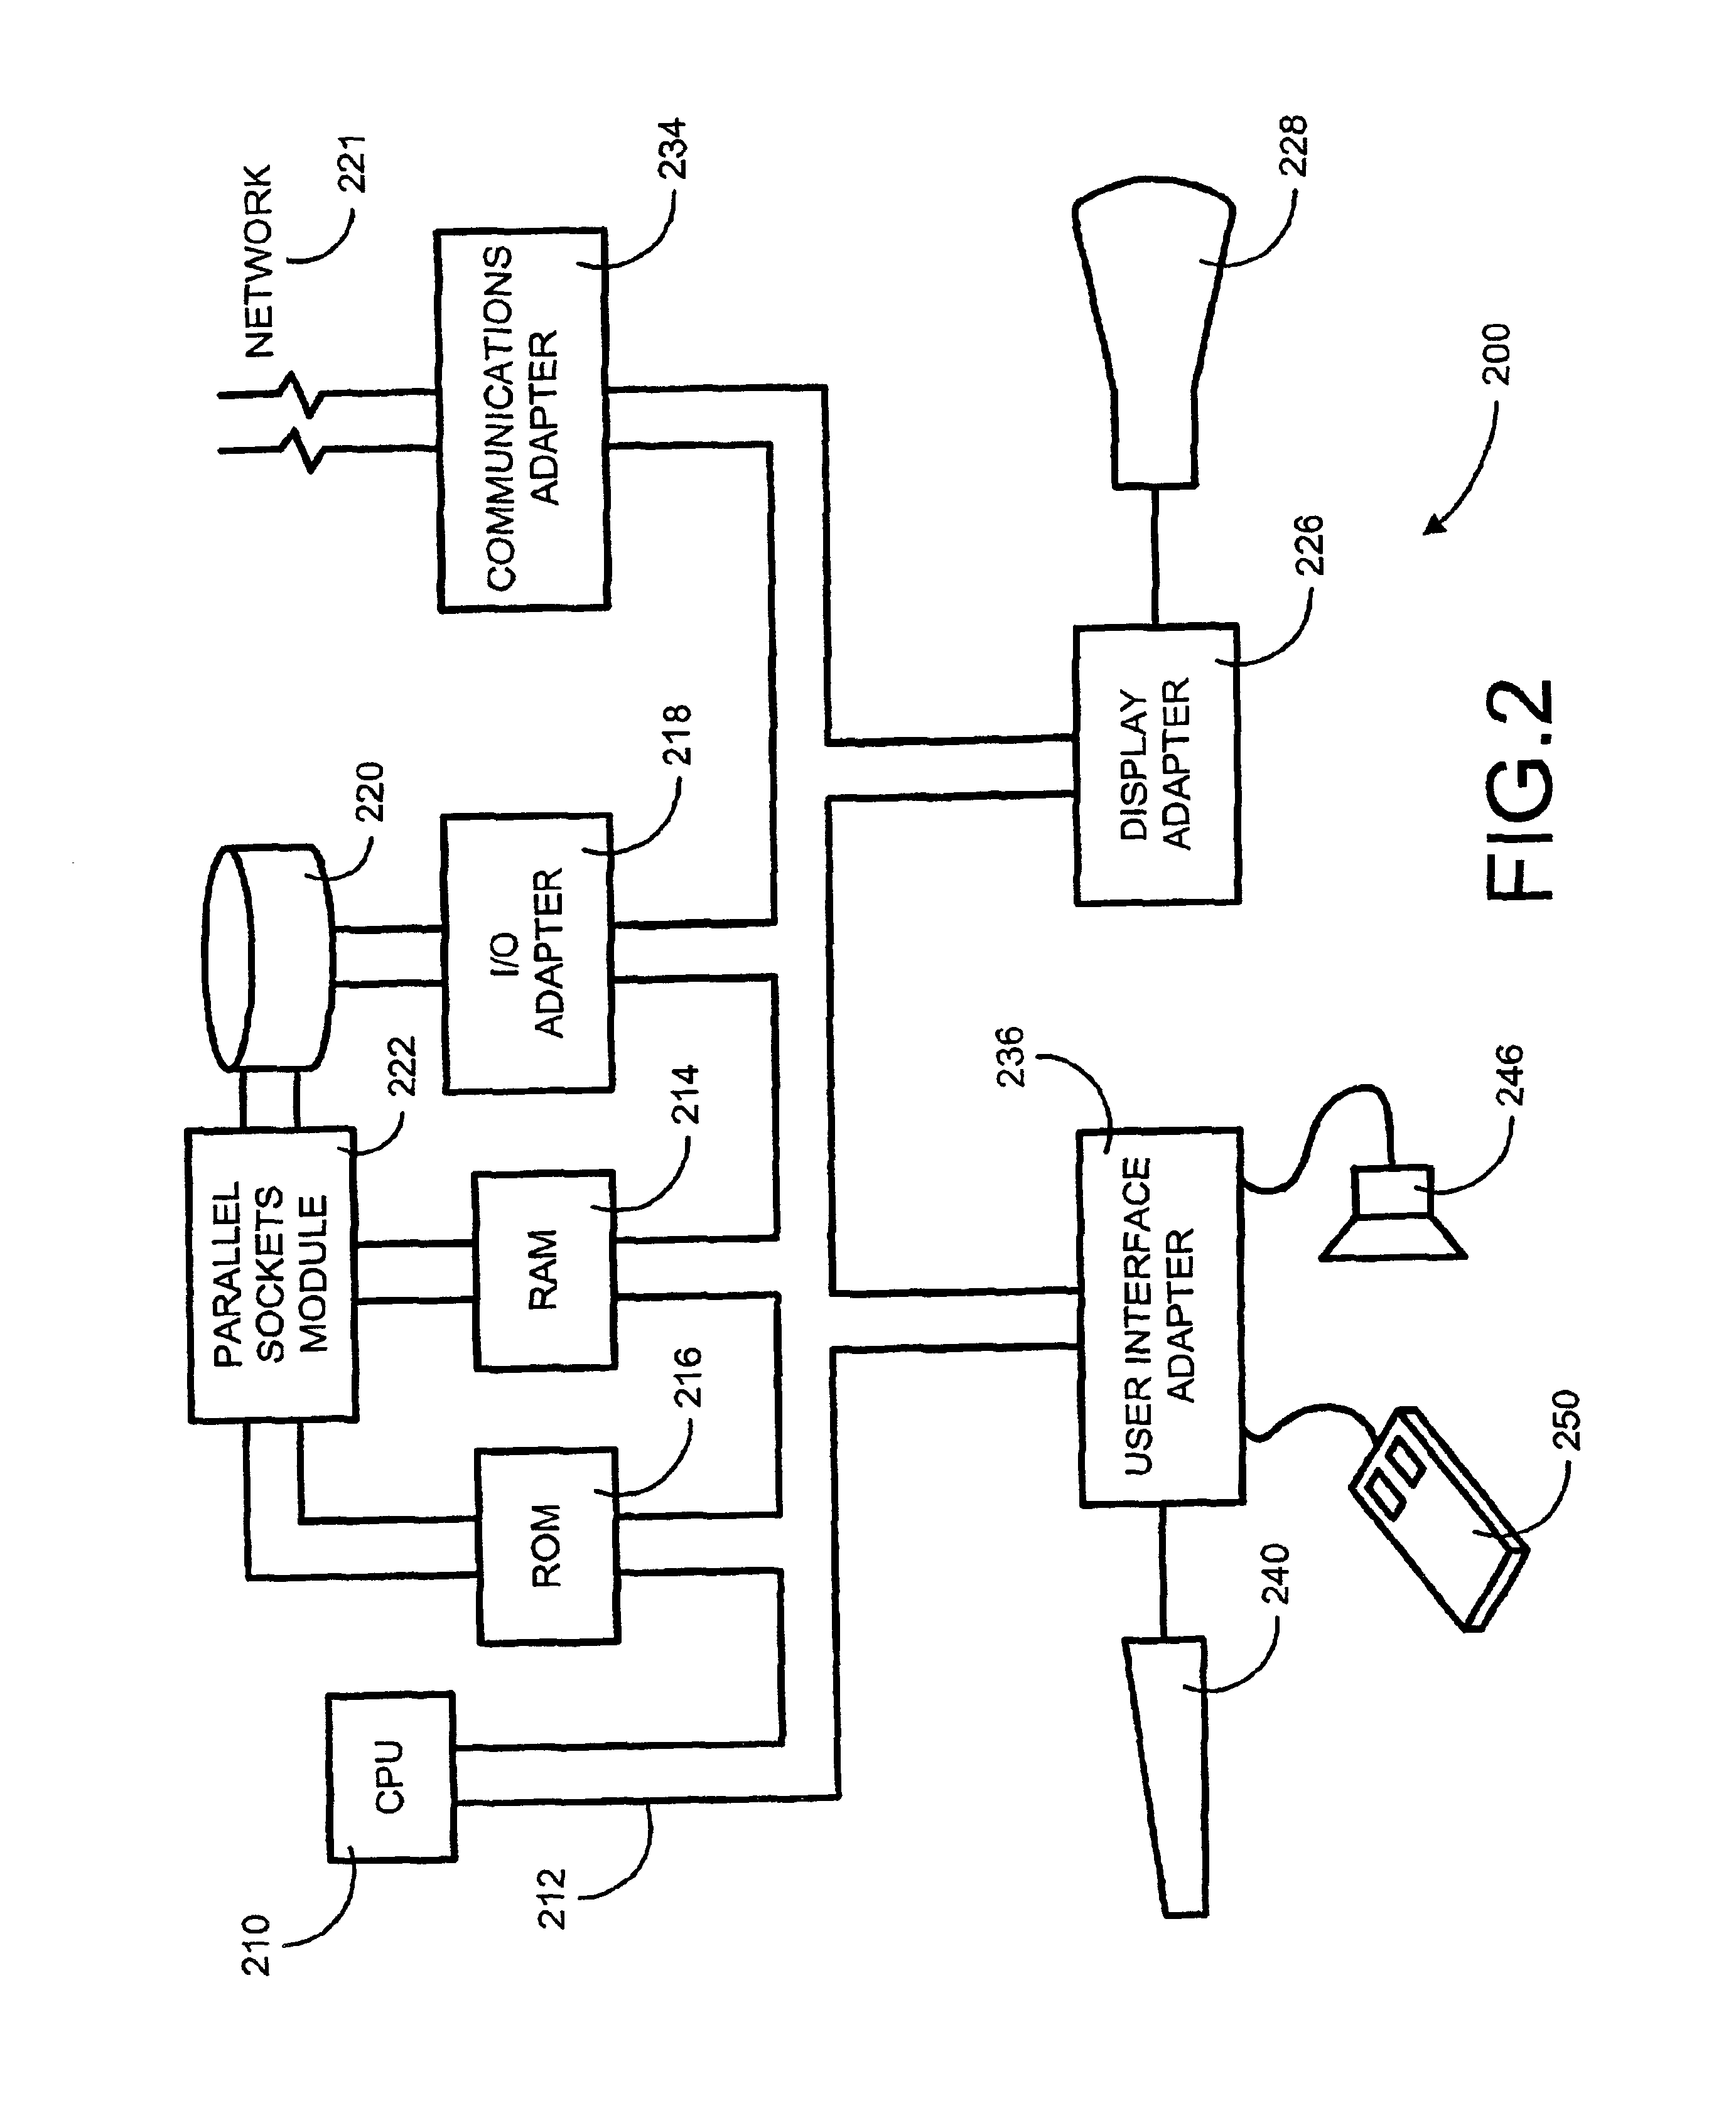 Method and system for managing parallel data transfer through multiple sockets to provide scalability to a computer network